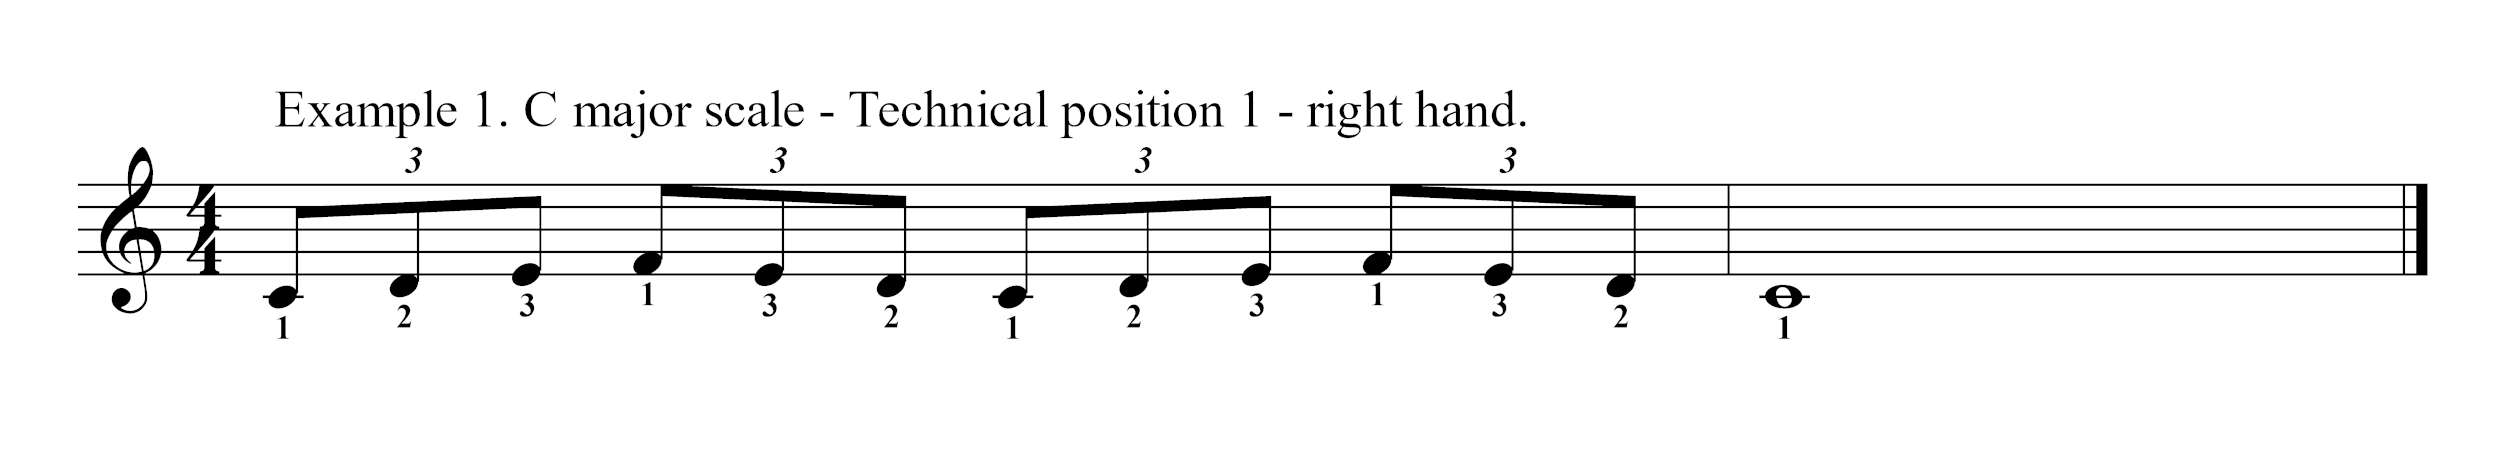 Technical position 1 right hand piano scale